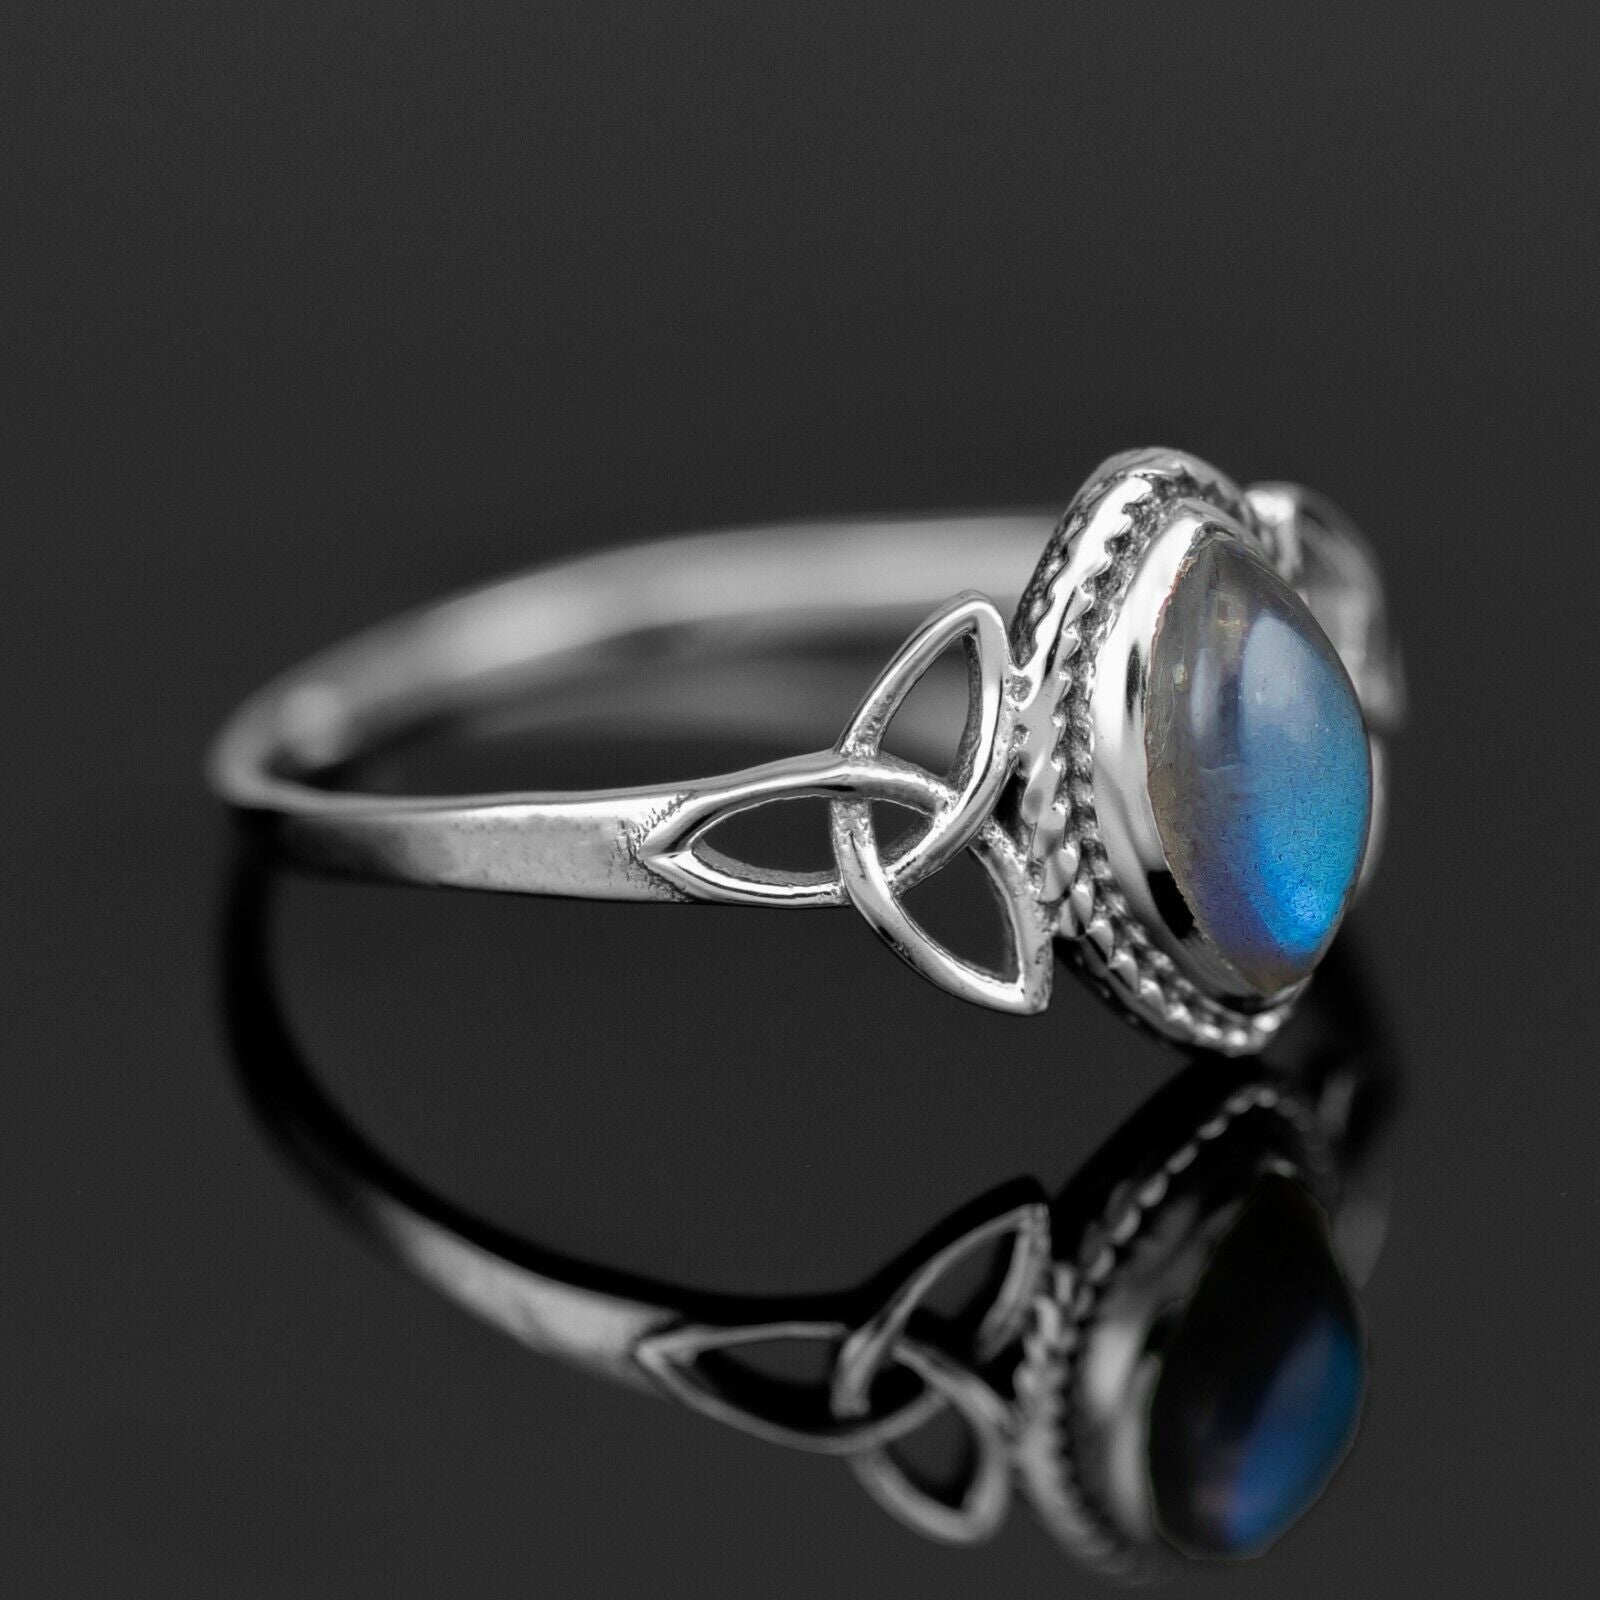 Marquise Labradorite 925 Sterling Silver Gemstone Ladies Ring Jewellery Gift Boxed Jewelery